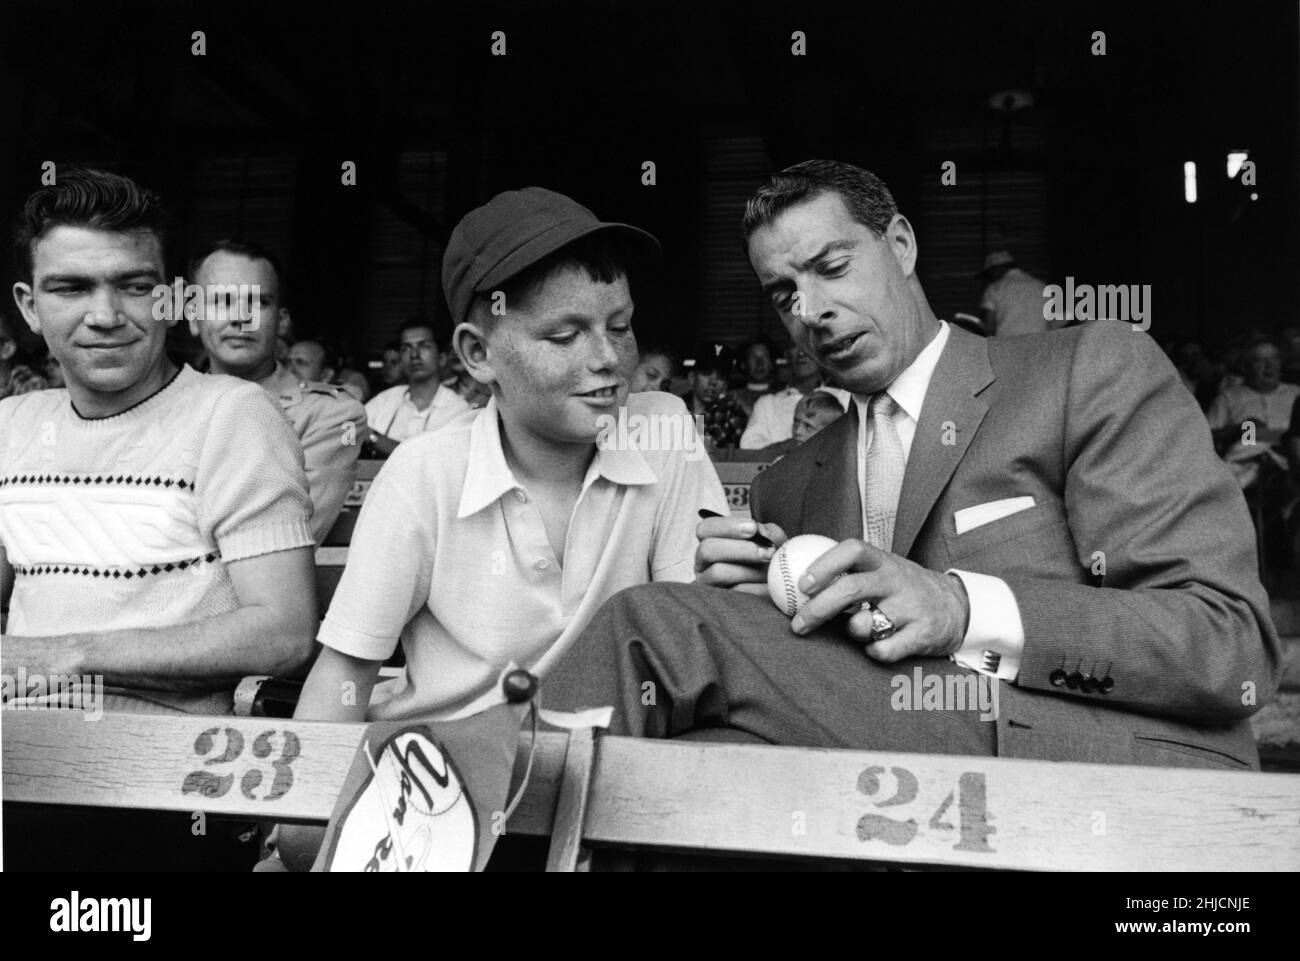 Joe DiMaggio signing a baseball in the stands. Stock Photo